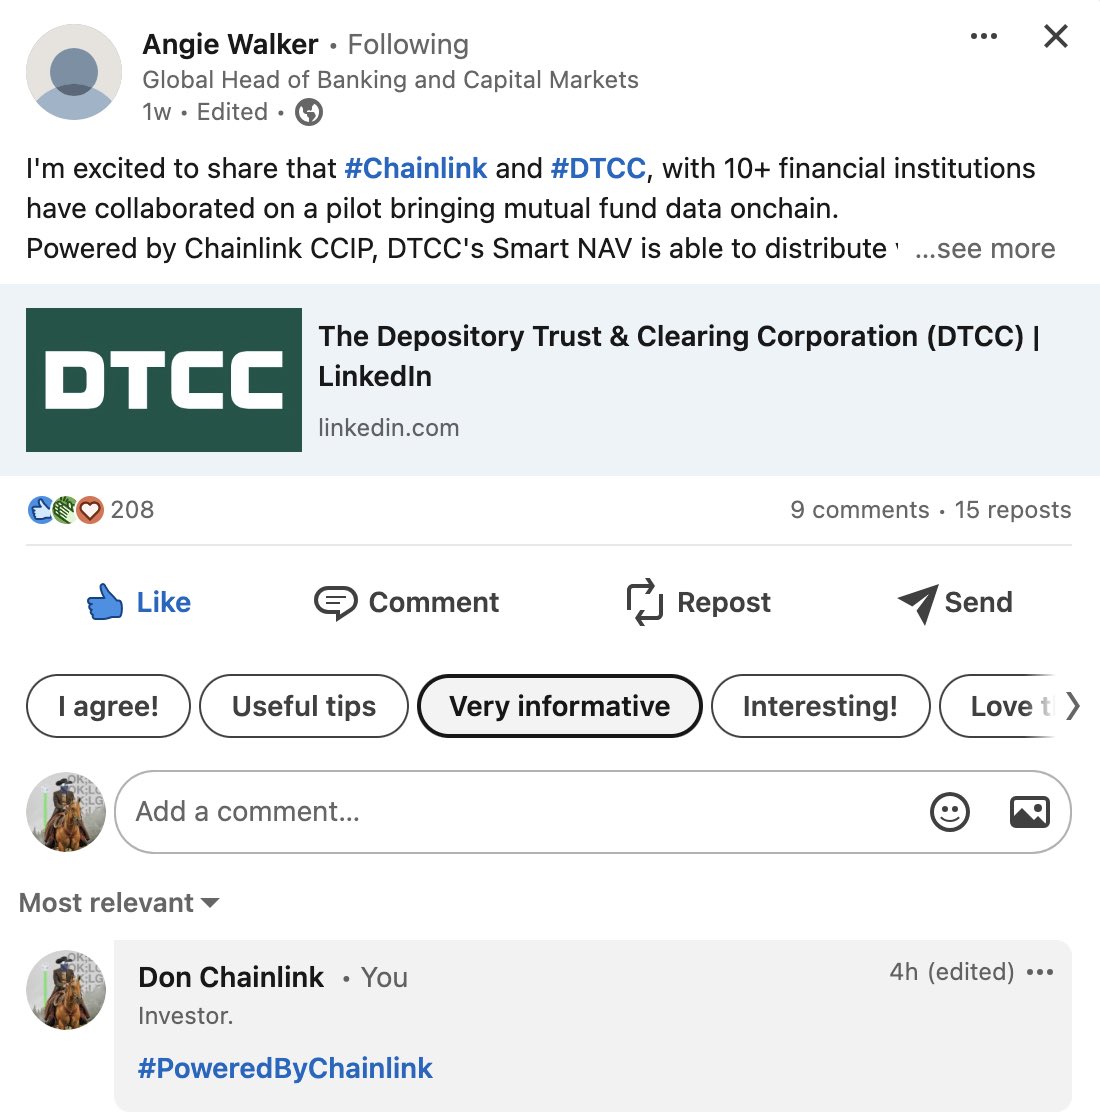 I’m all in…

#Chainlink and #DTCC, along with 10+ financial institutions collaborated on a pilot bringing mutual fund data onchain

Swift, the backbone of global financial communication for 11,000+ banks is also collaborating with #Chainlink

Vertical Ascent

Accumulate & #HODL